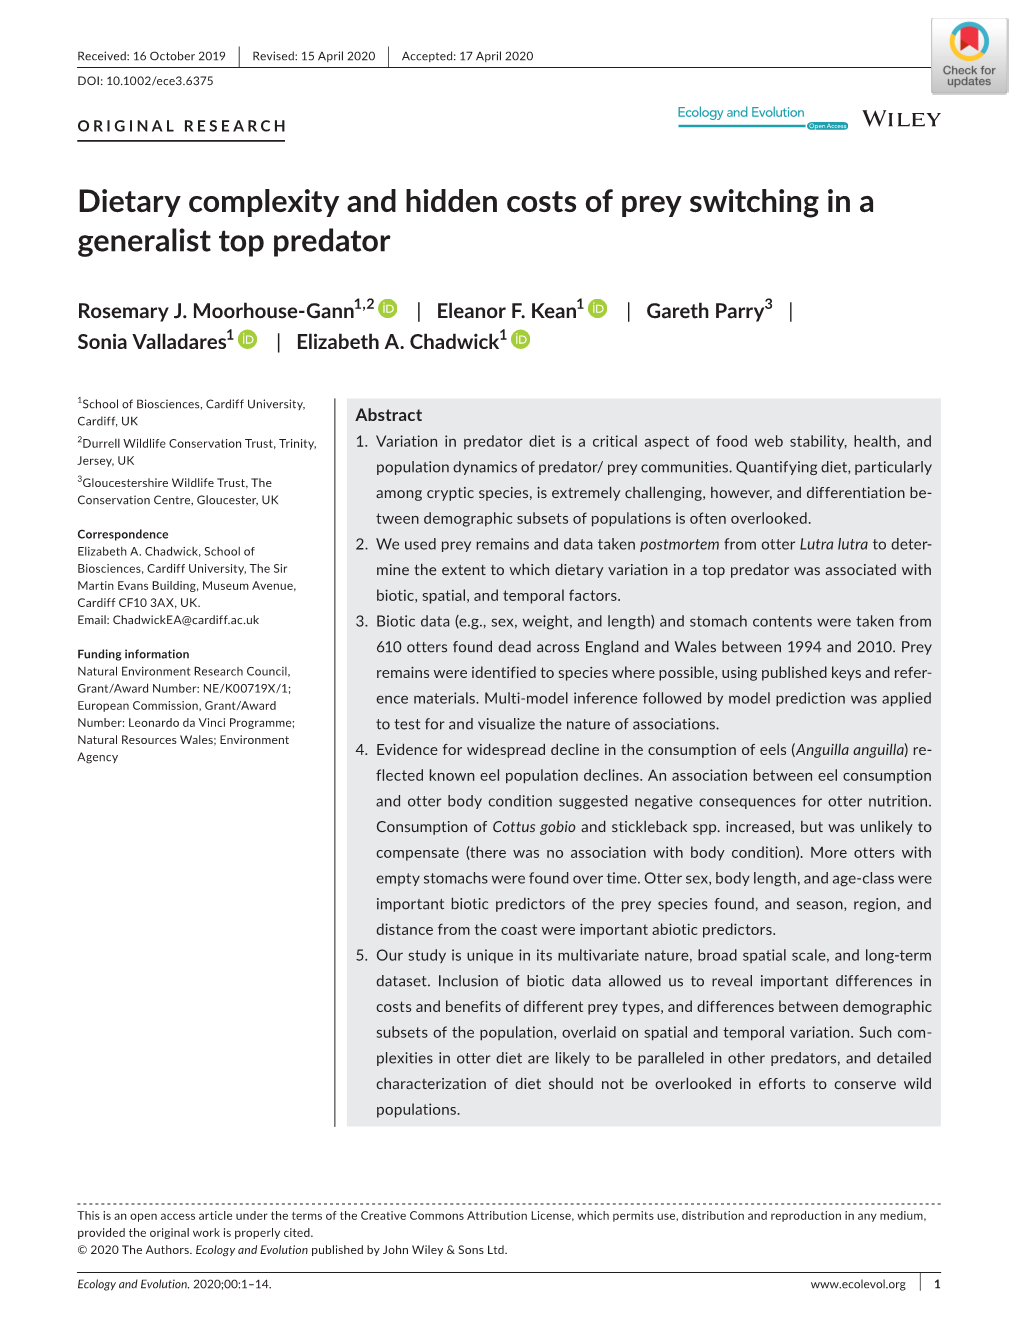 Dietary Complexity and Hidden Costs of Prey Switching in a Generalist Top Predator